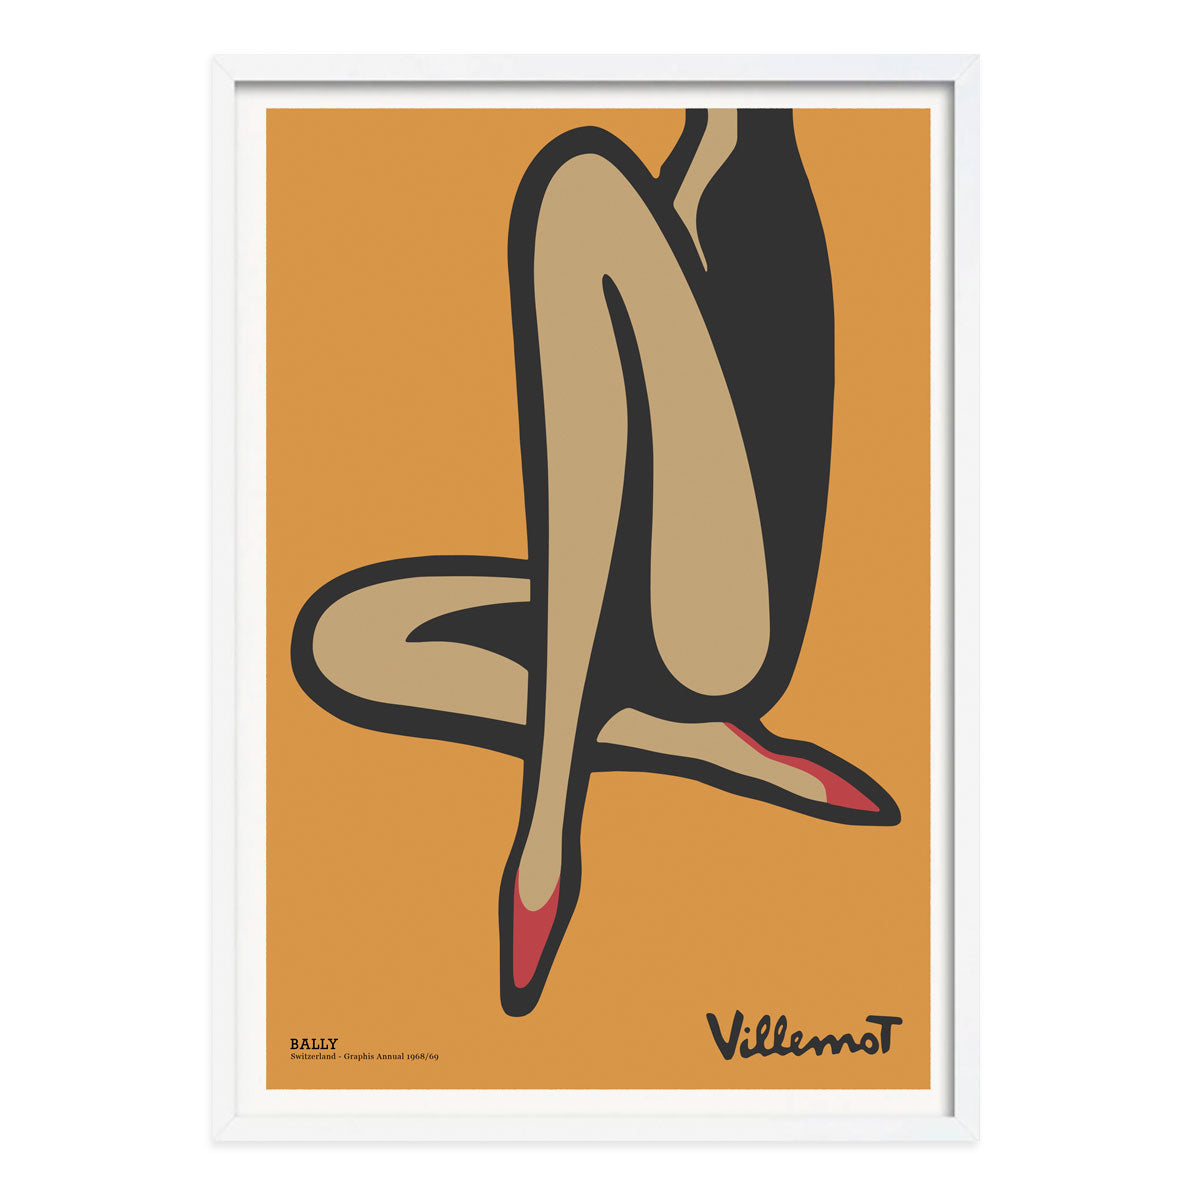 Bally Villemot retro vintage advertising poster print in white frame from Places We Luv